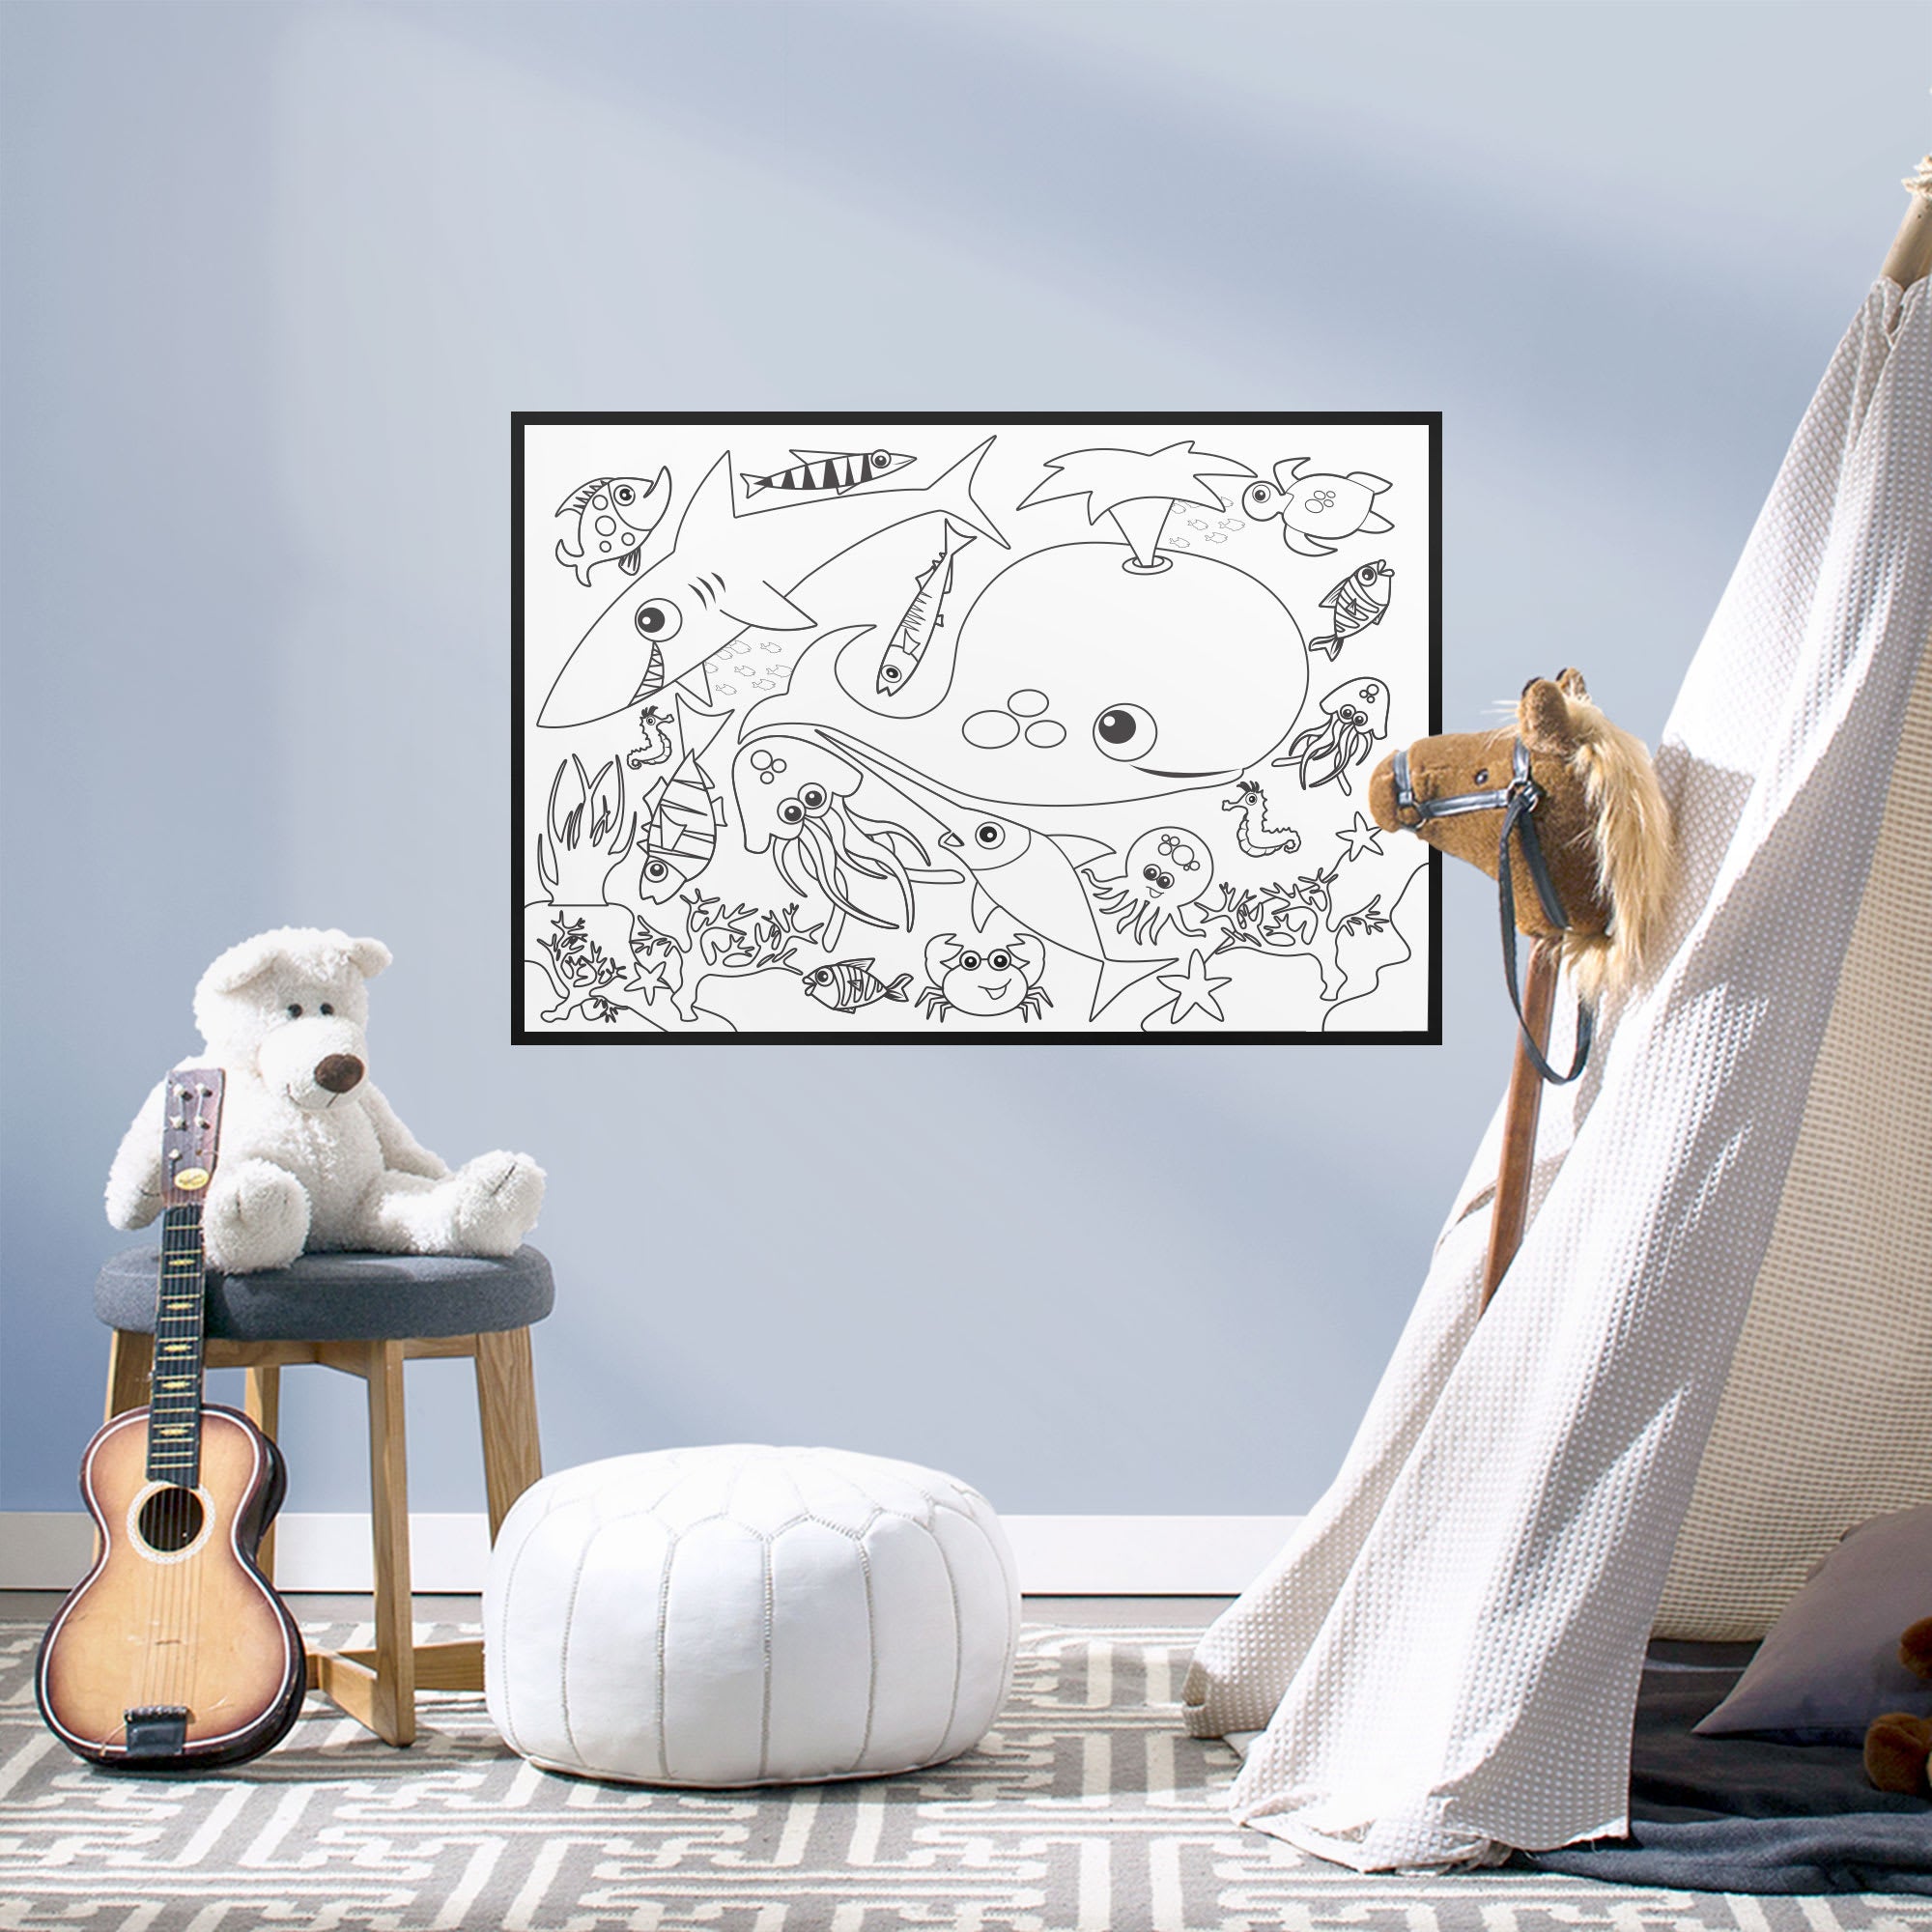 Coloring Sheet: Ocean Animals - Removable Dry Erase Vinyl Decal 38.0"W x 26.0"H by Fathead